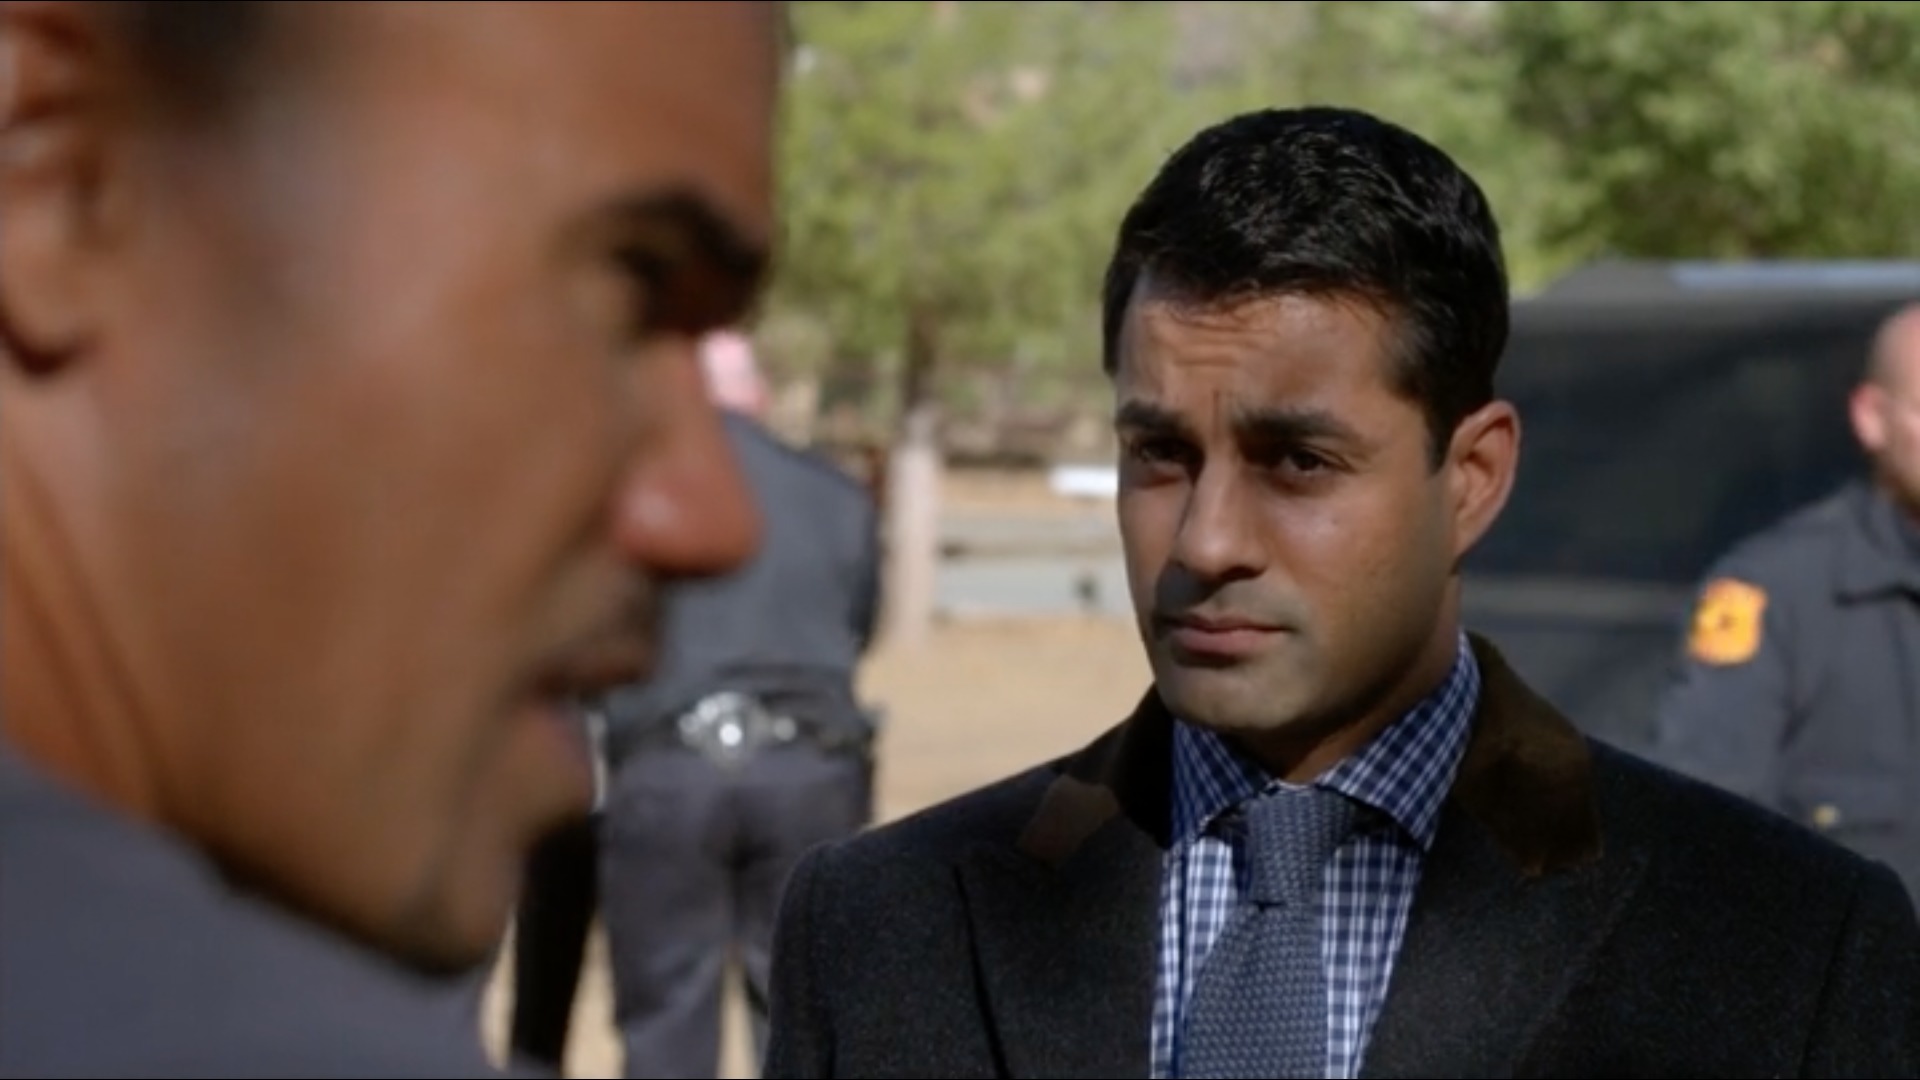 Andy Gala as Detective Ravi Shah on CBS's Criminal Minds.